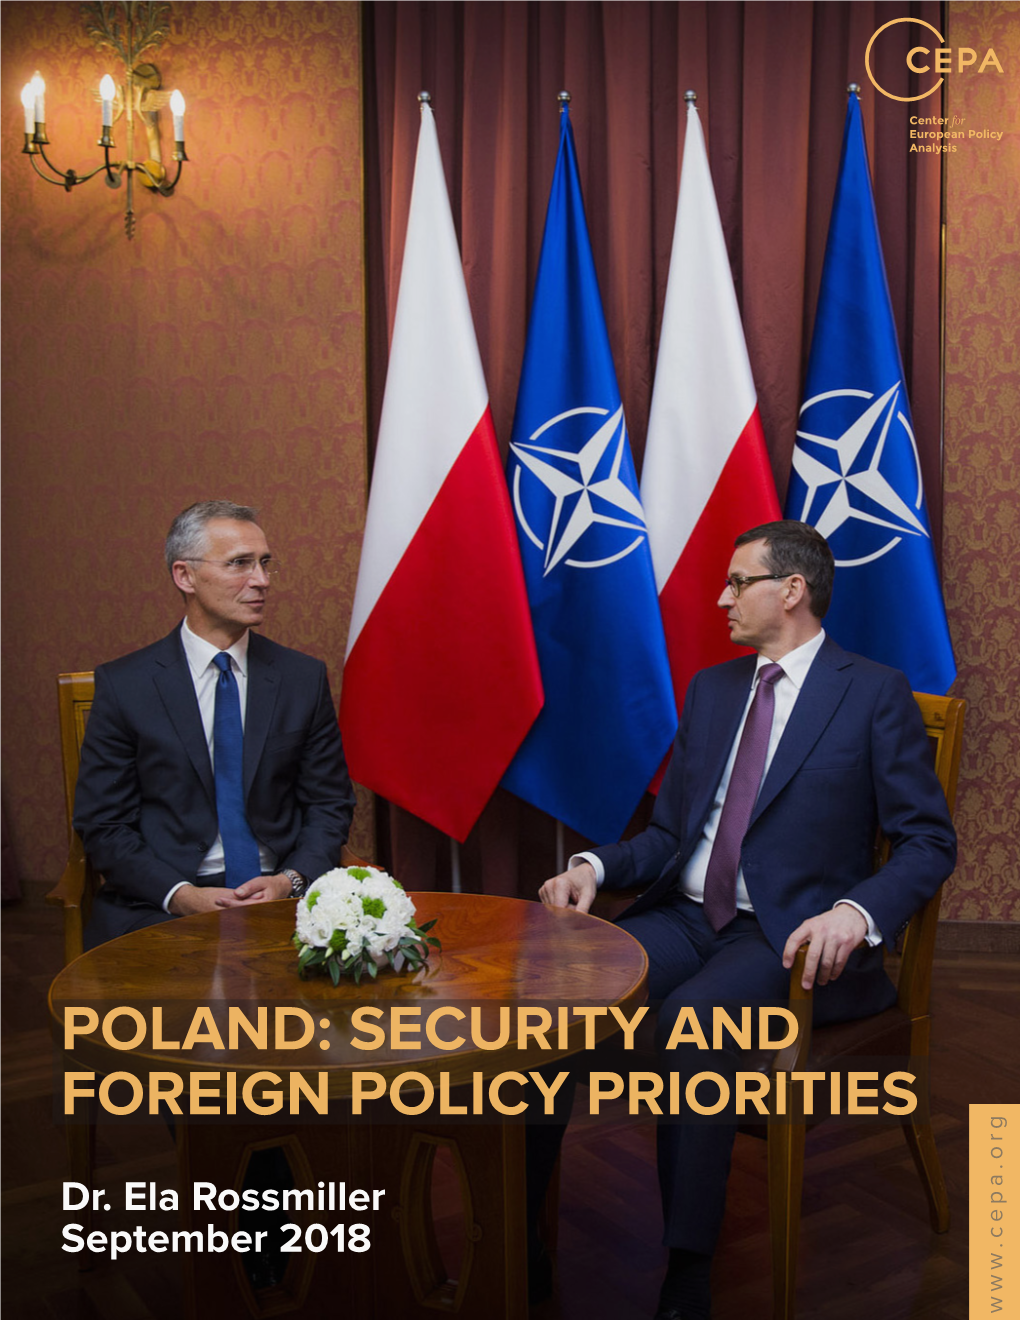 Poland: Security and Foreign Policy Priorities